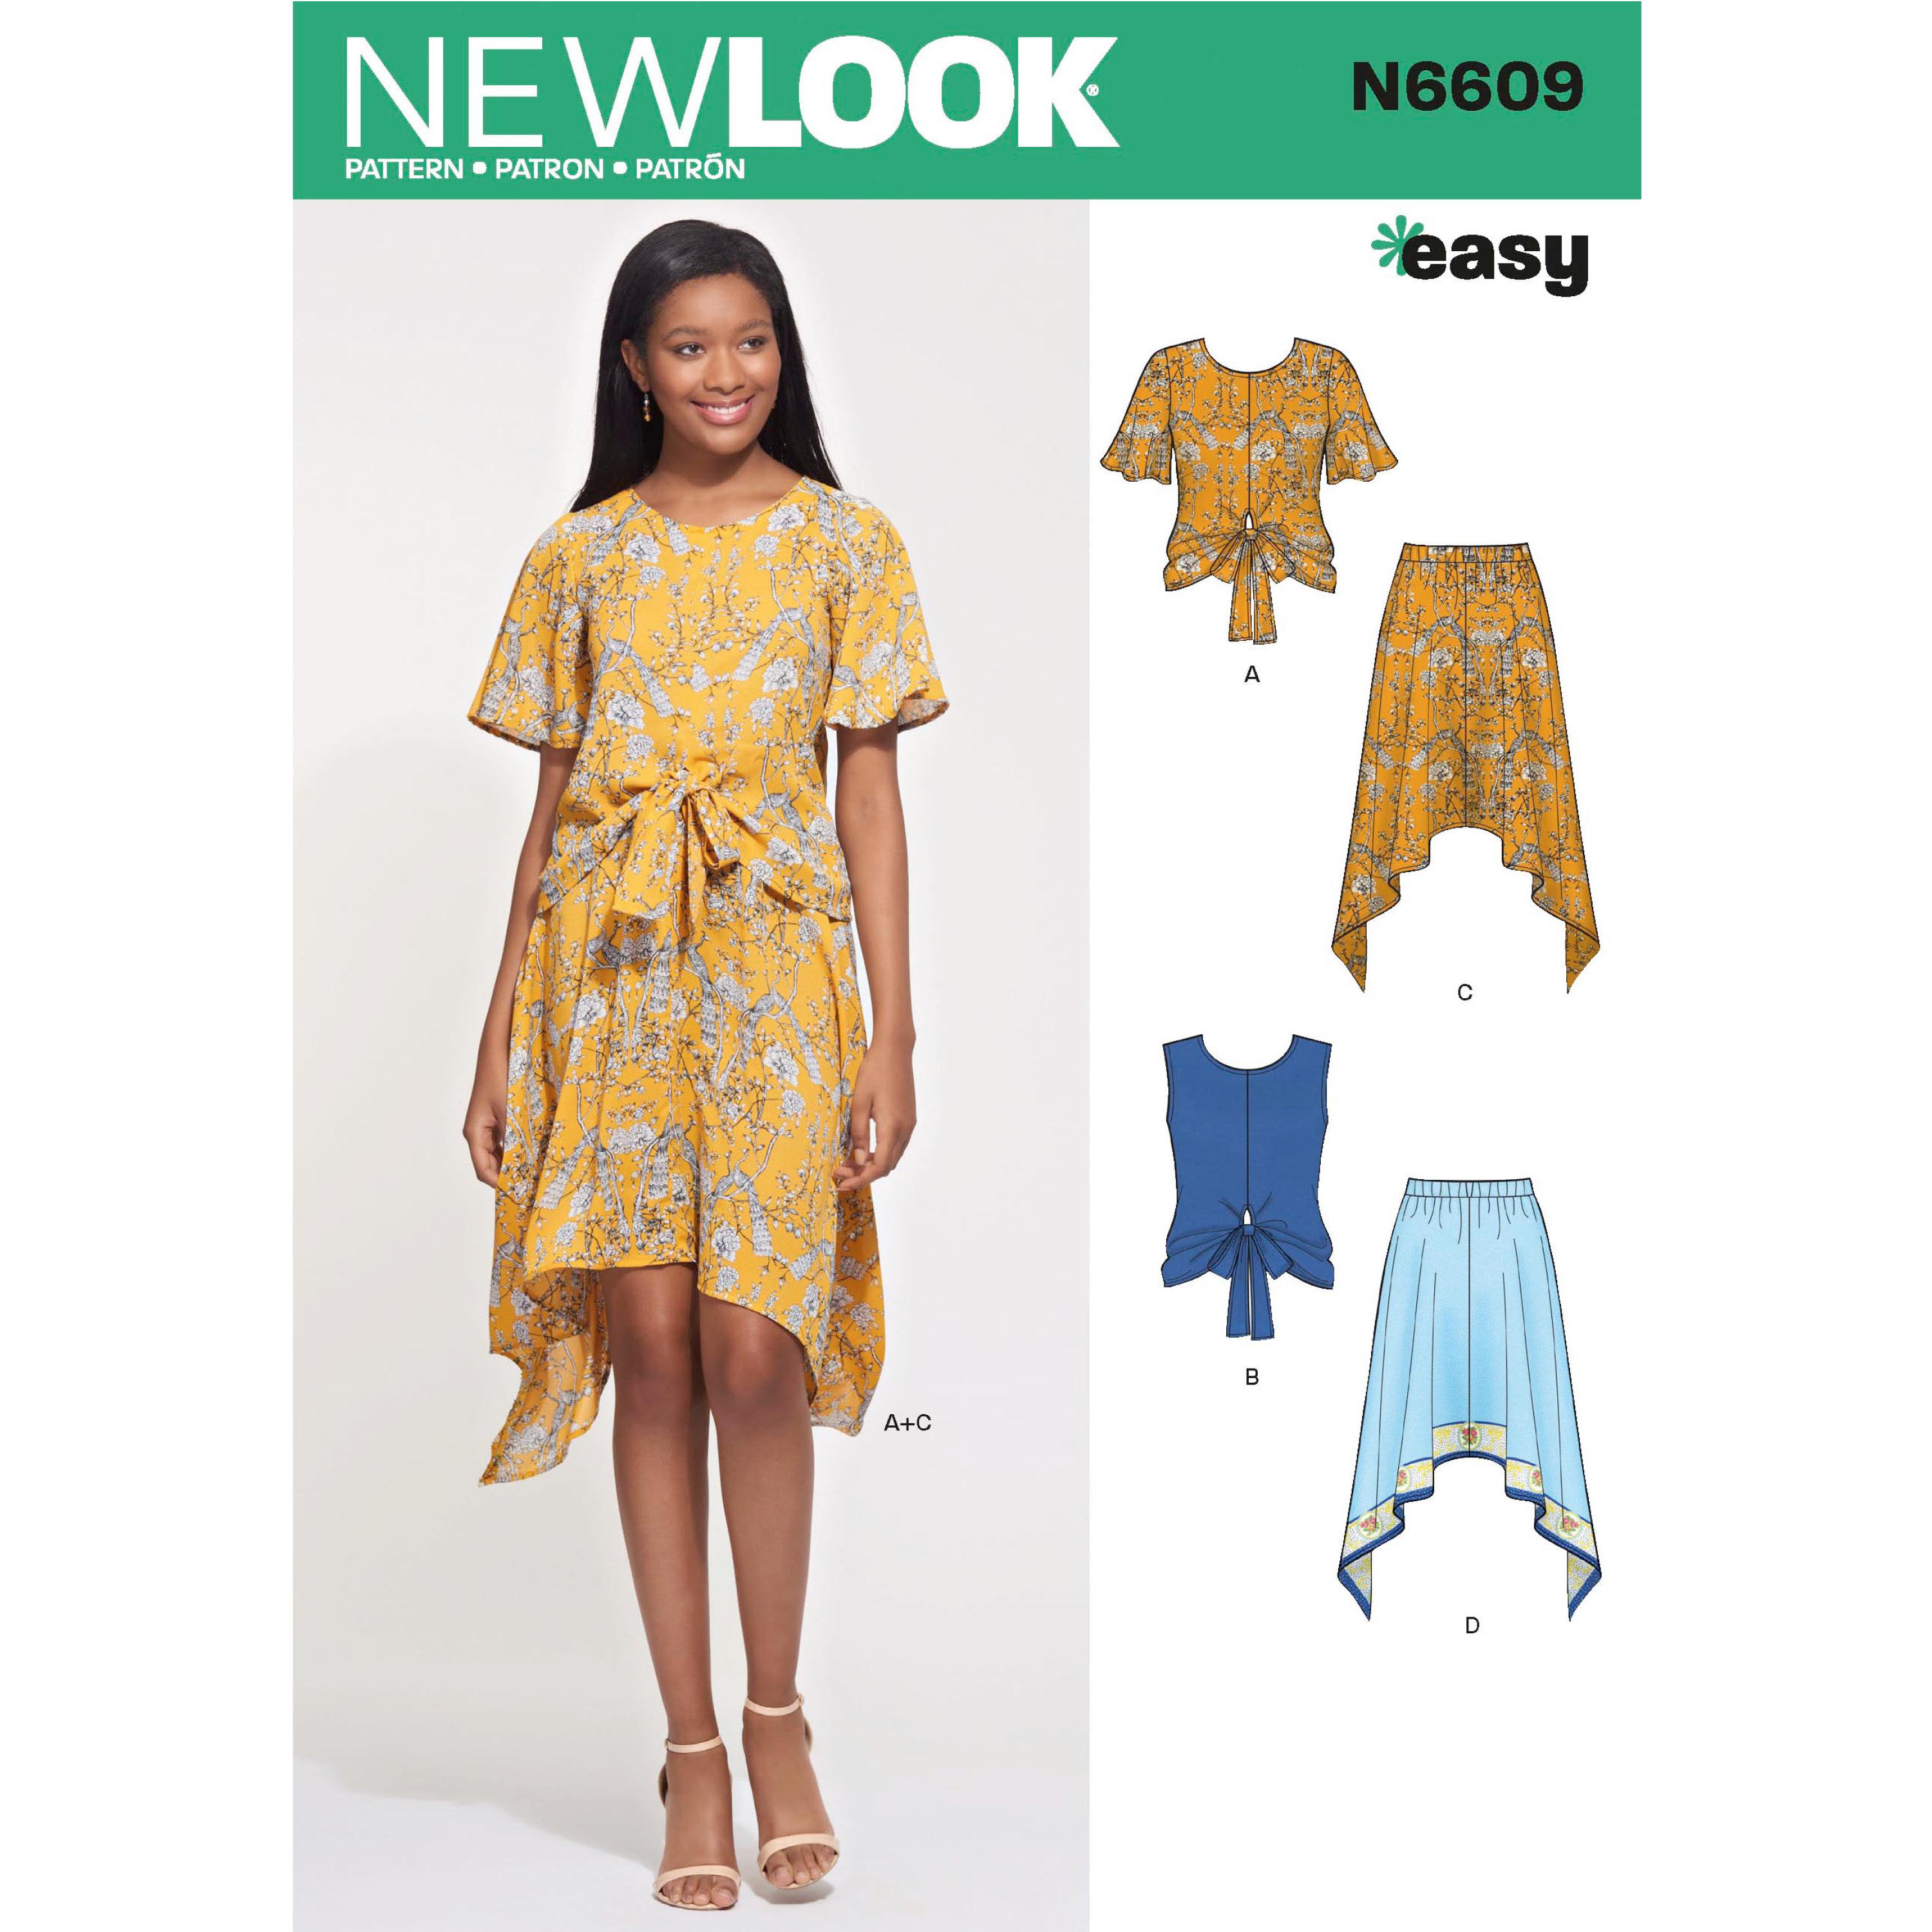 NewLook Sewing Pattern N6609 Misses' 2-Piece Dress